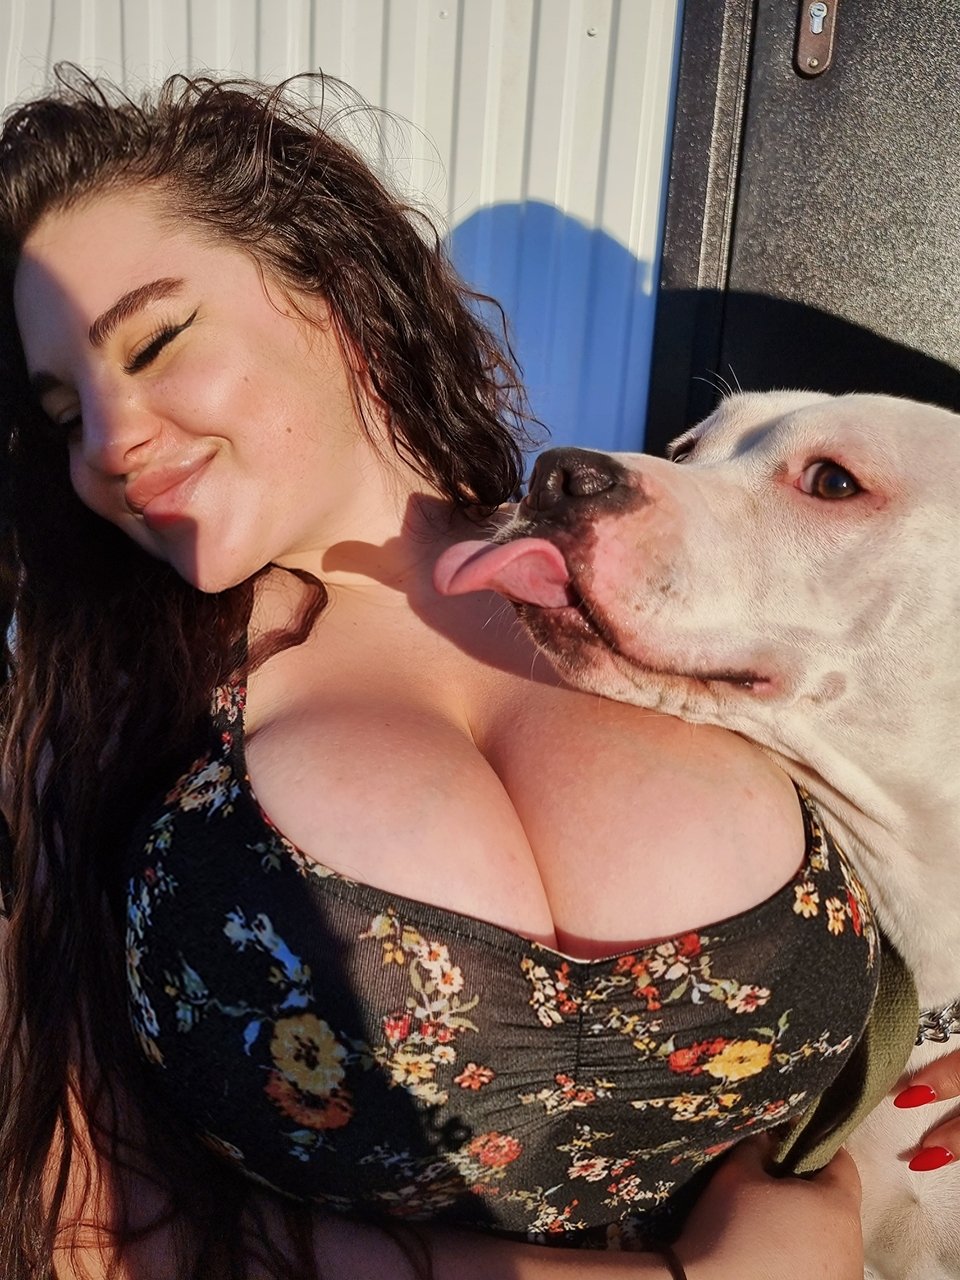 TW Pornstars - 1 pic. AnnaSivona❤️ OF. Twitter. do you like dogs? put like  it if yes !!! i just adore dog. 6:42 PM - 6 Jun 2021